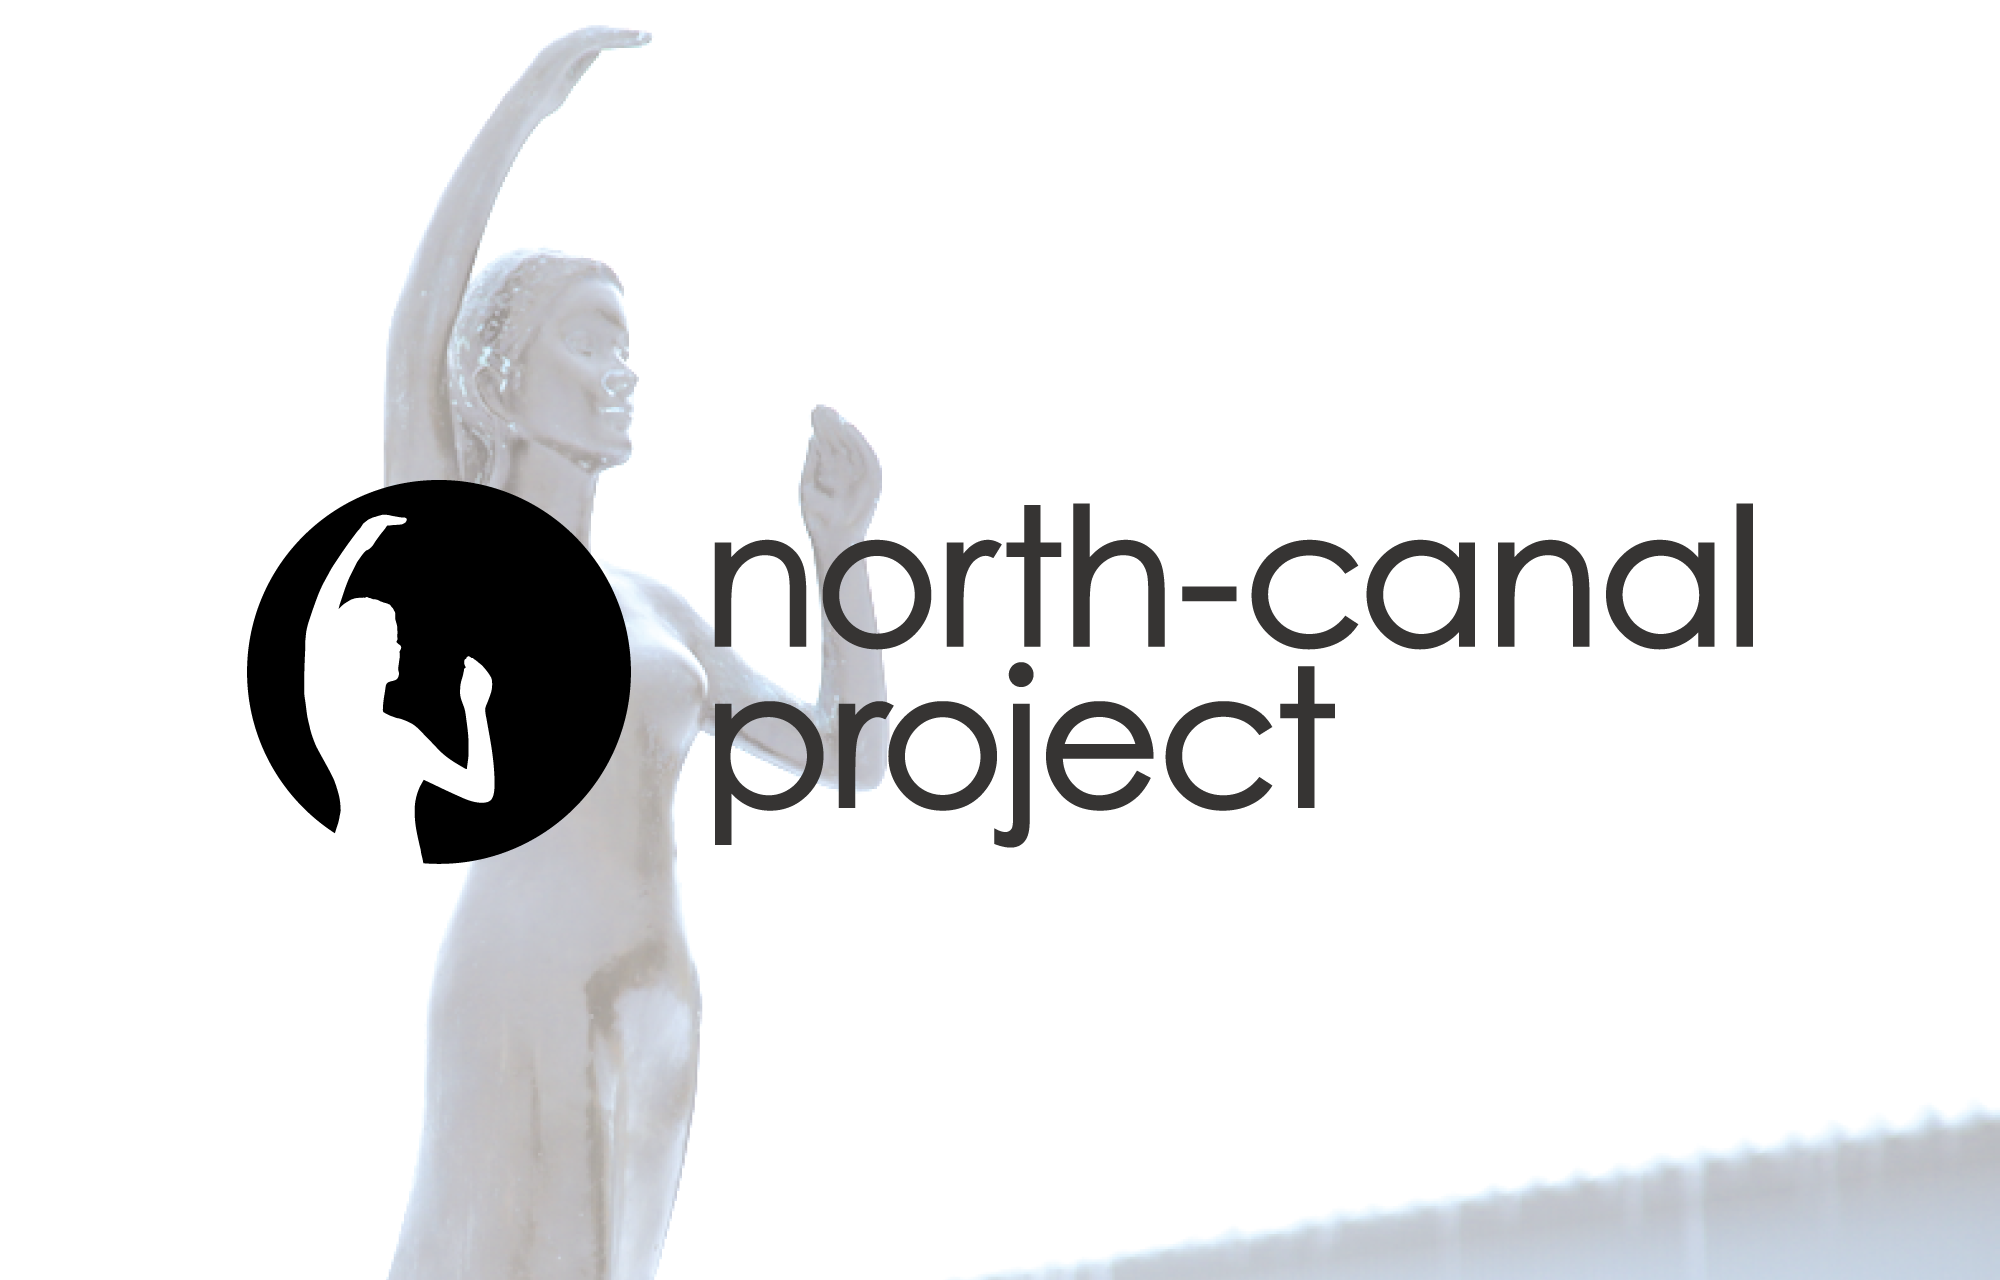 north-canal project